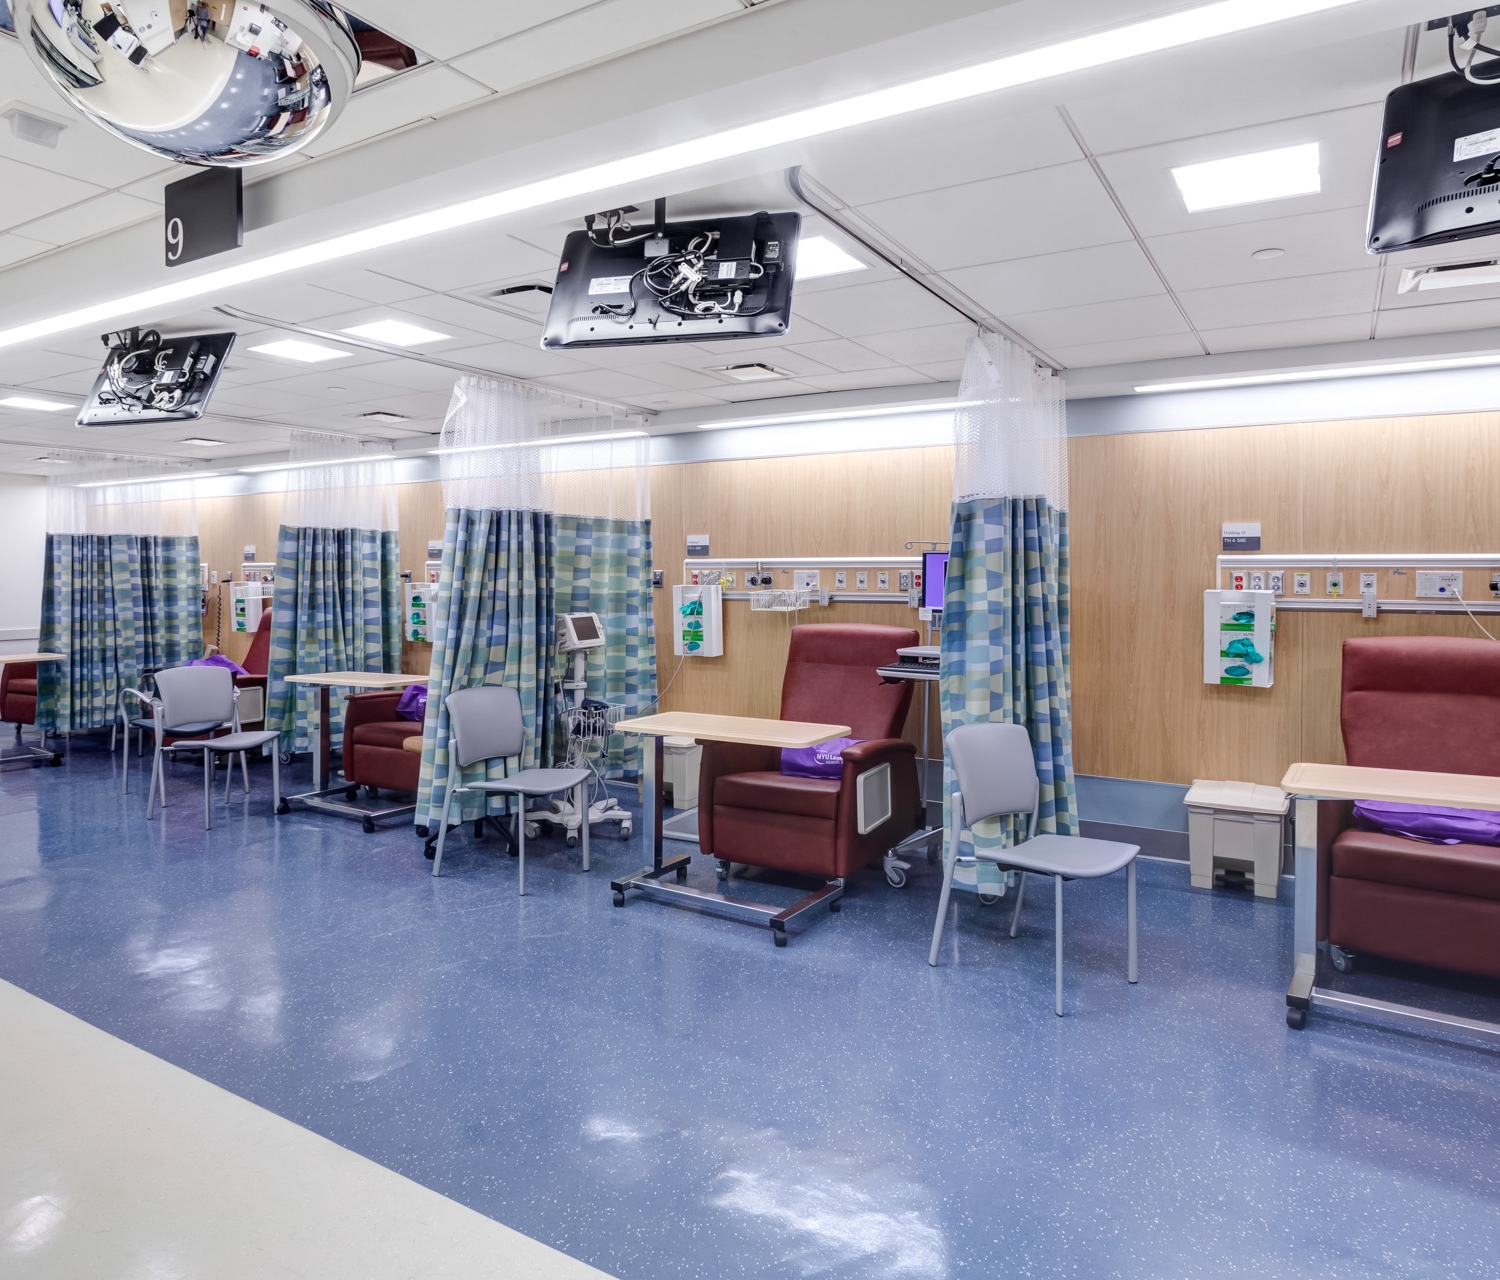 Interior medical facility for B. R. Fries &amp; Associates &#8220;Those photos of NYU Langone are just fantastic.  Thank you very much.&#8221; Bill B. &#8211; B. R. Fries &amp; associates, LLC